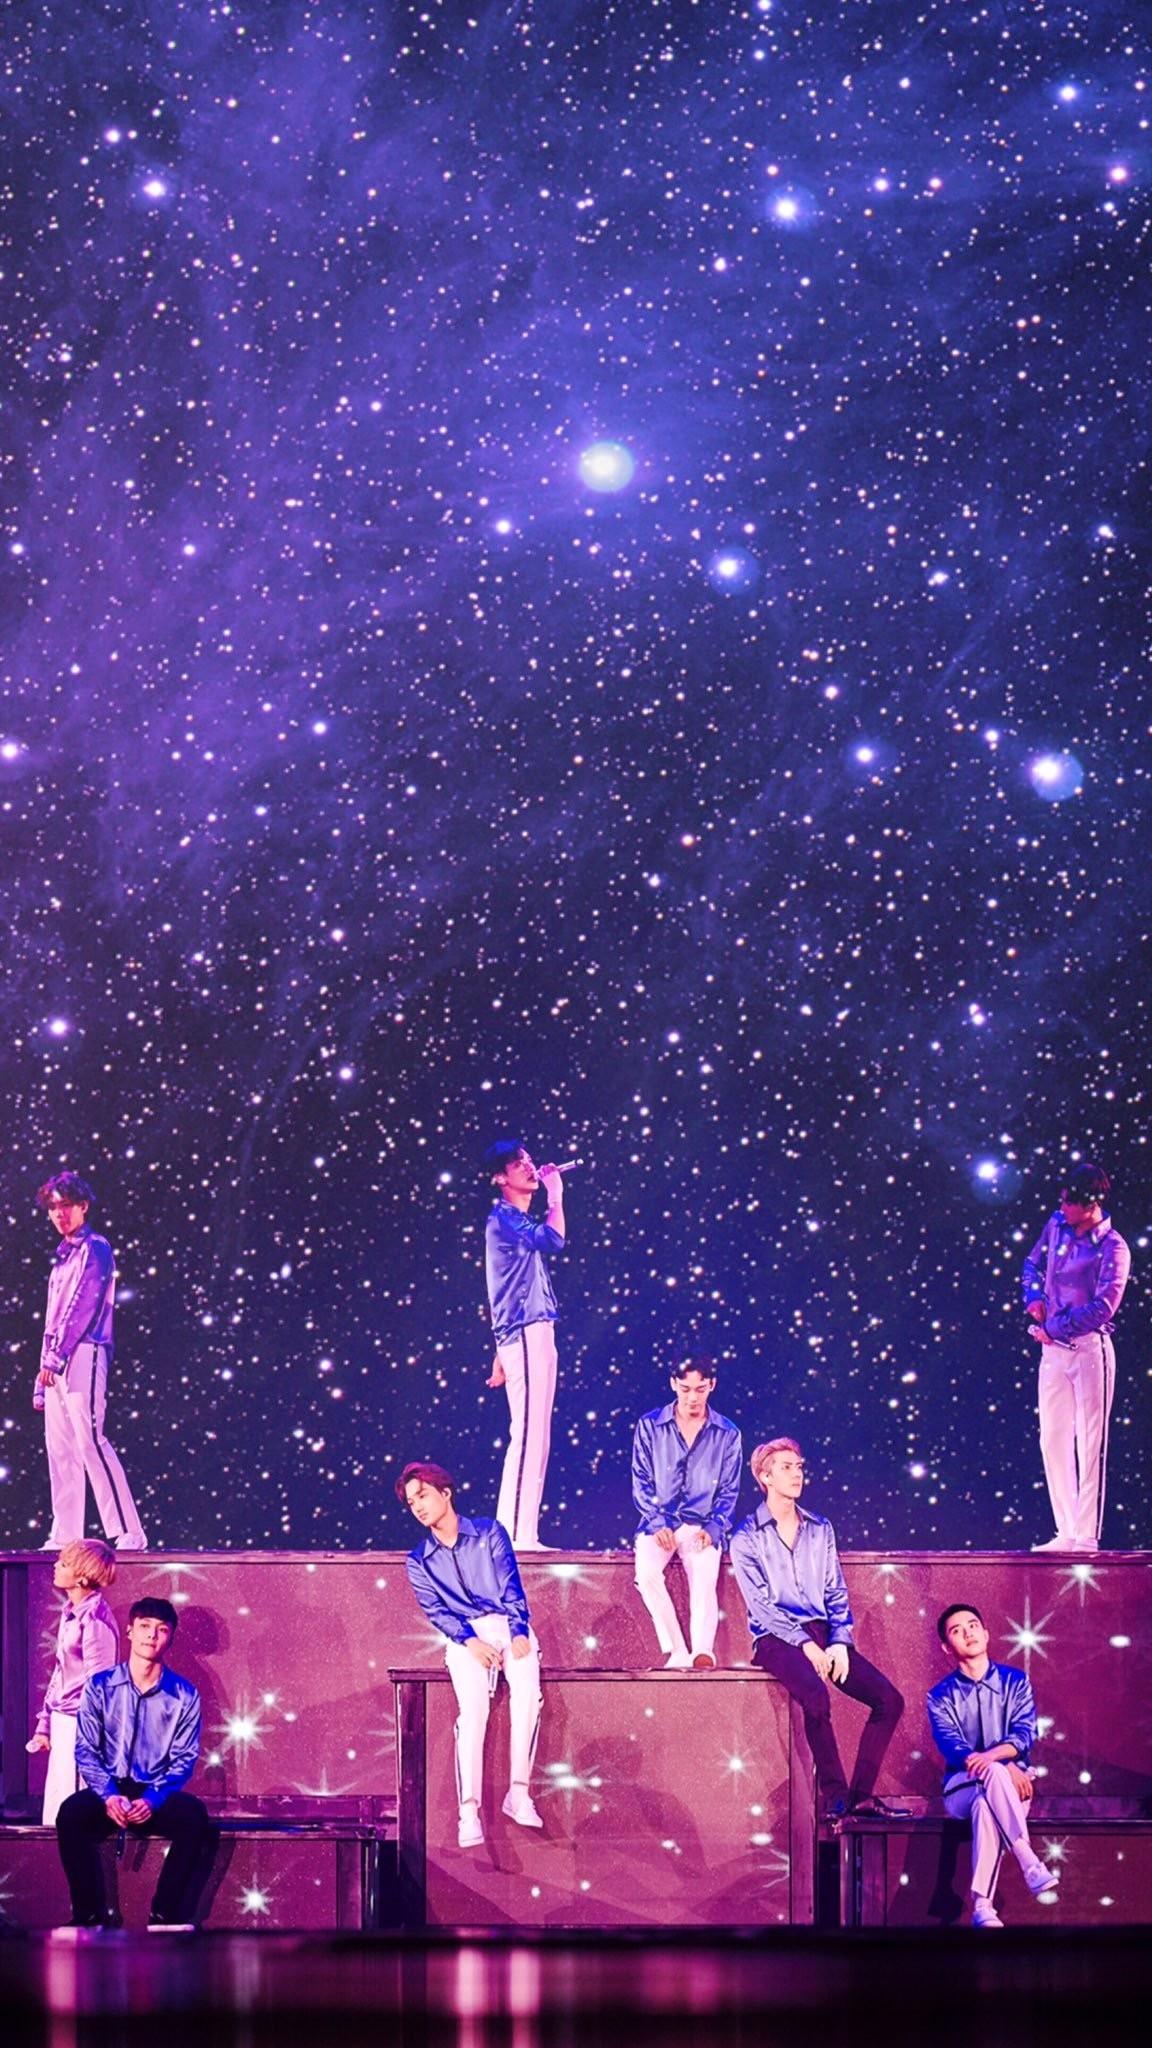 Exo Android Wallpapers Wallpaper Cave